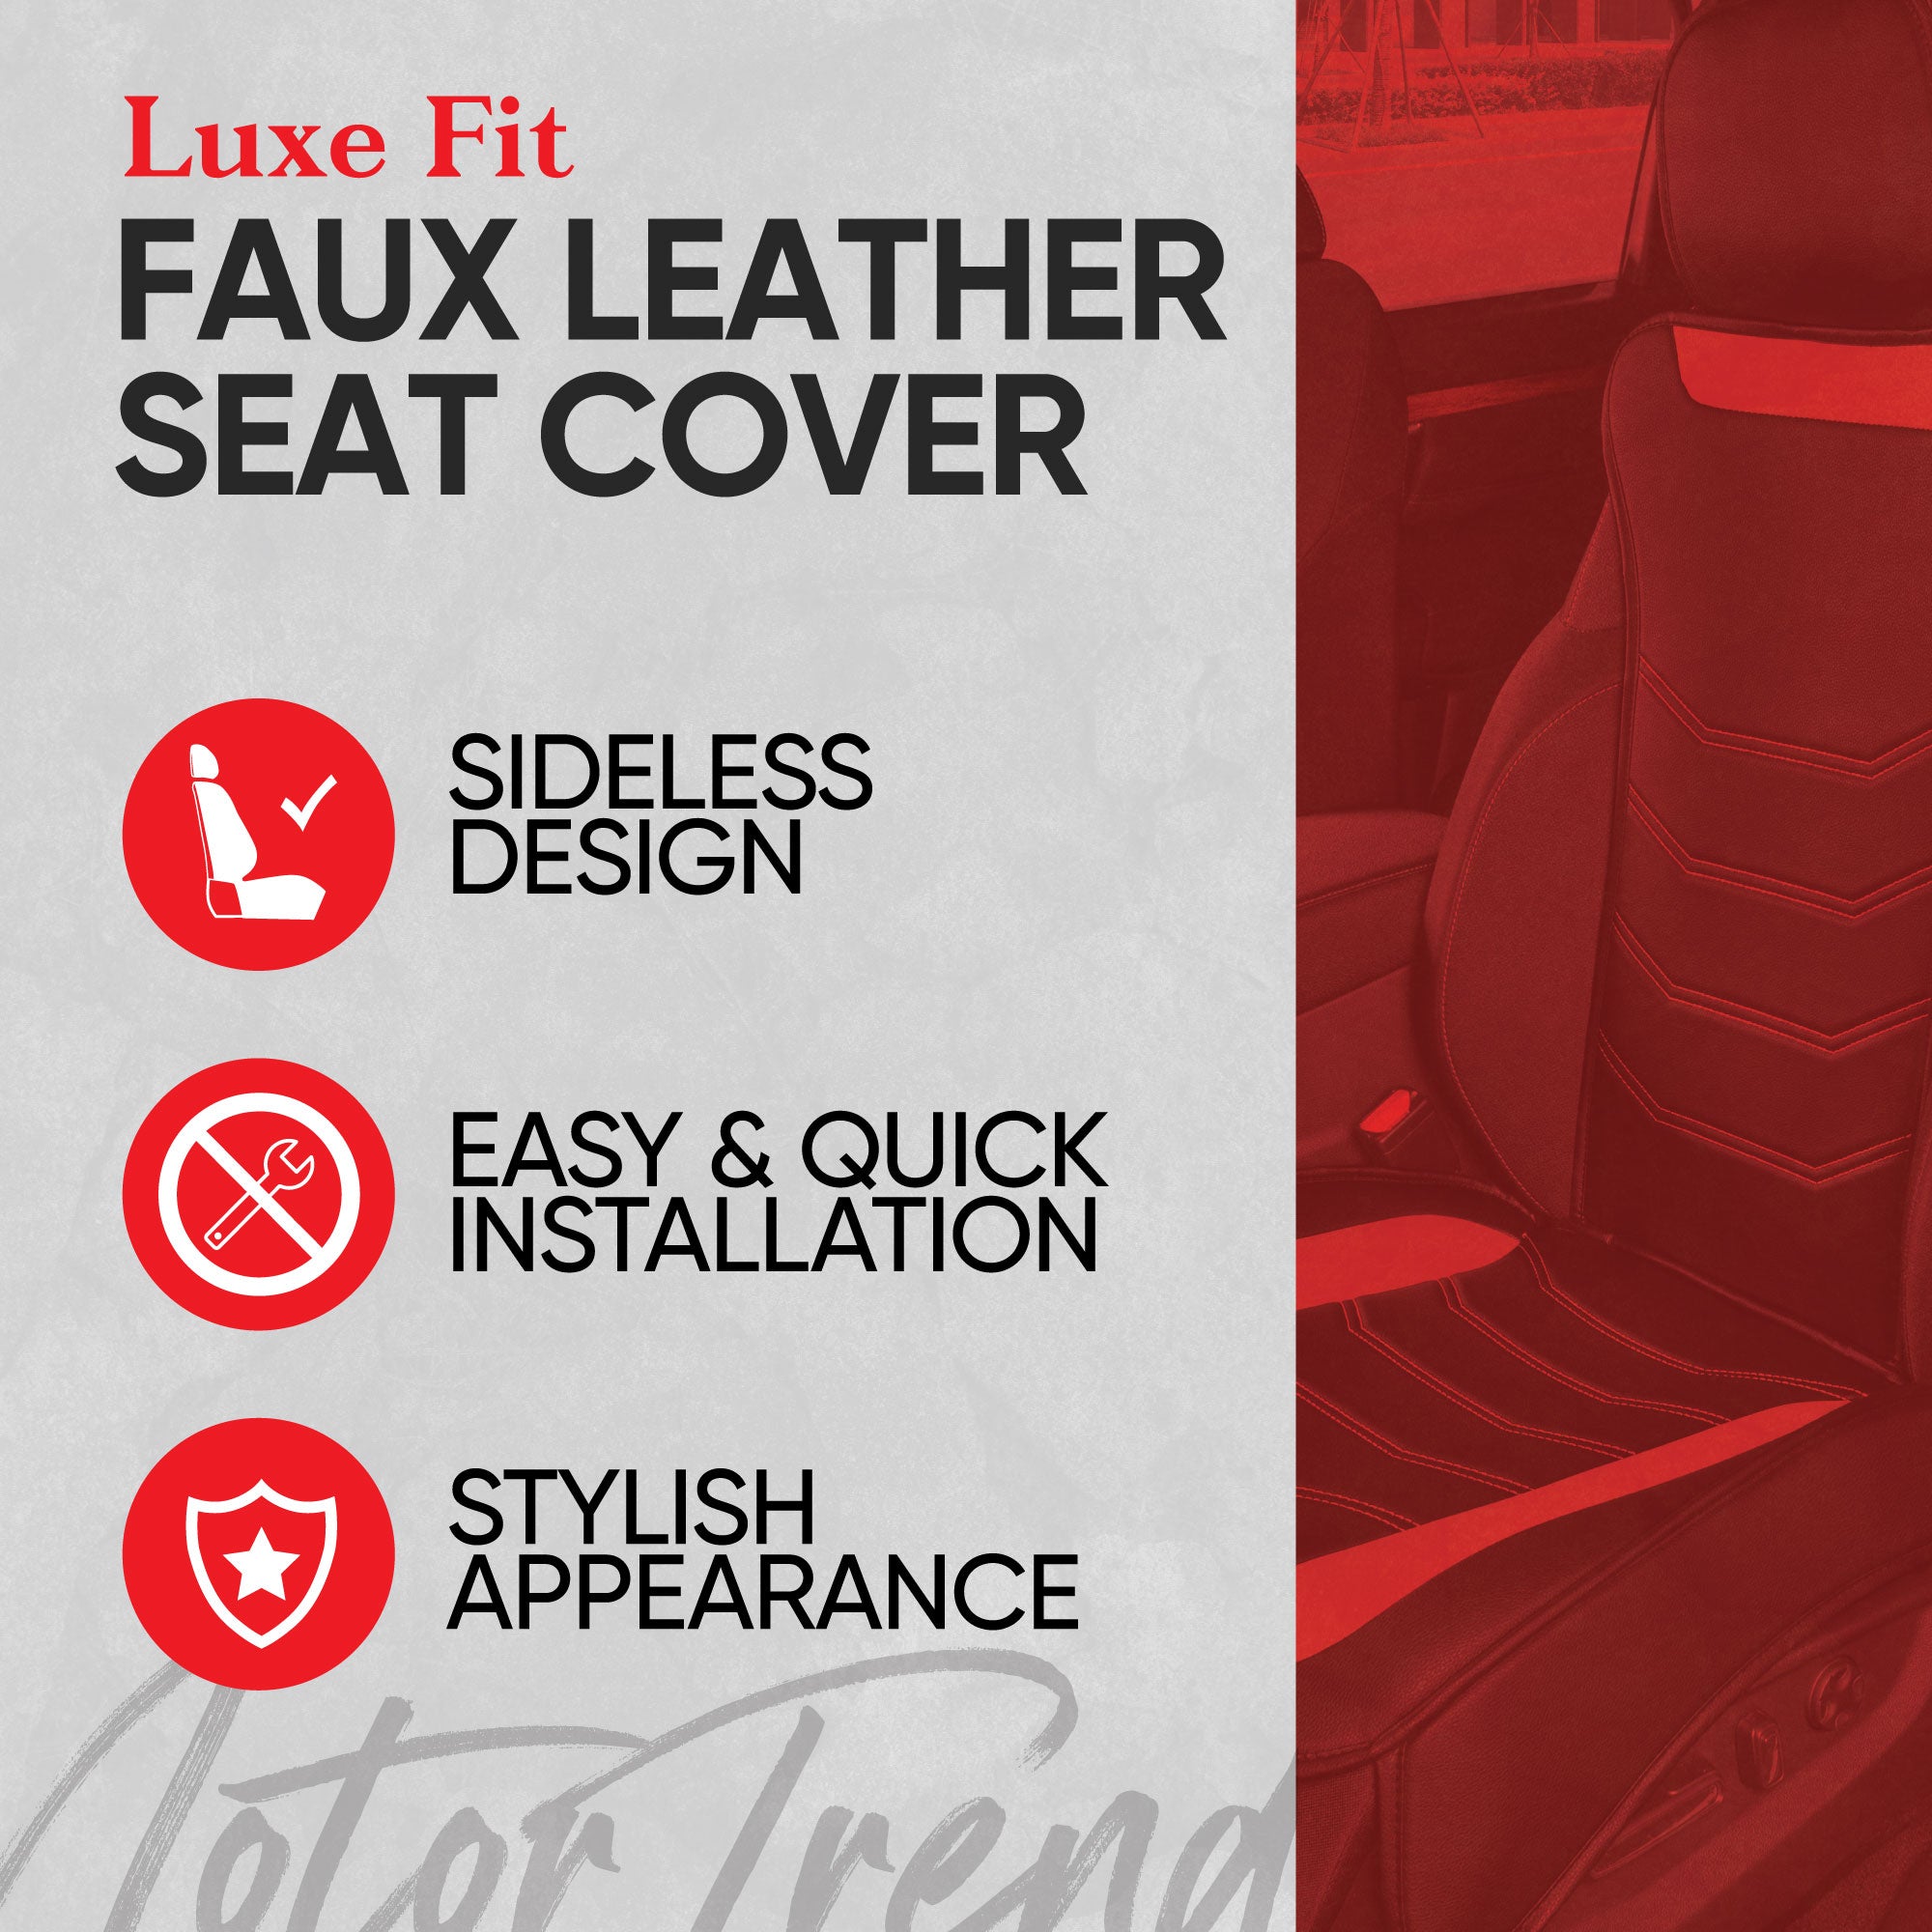 Motor Trend LuxeFit Red Seat Cover for Cars Trucks Van SUV (1 Piece), Premium Faux Leather Car Seat Cover, Easy to Install Automotive Seat Cover with Storage Pockets, Fits Most Vehicles